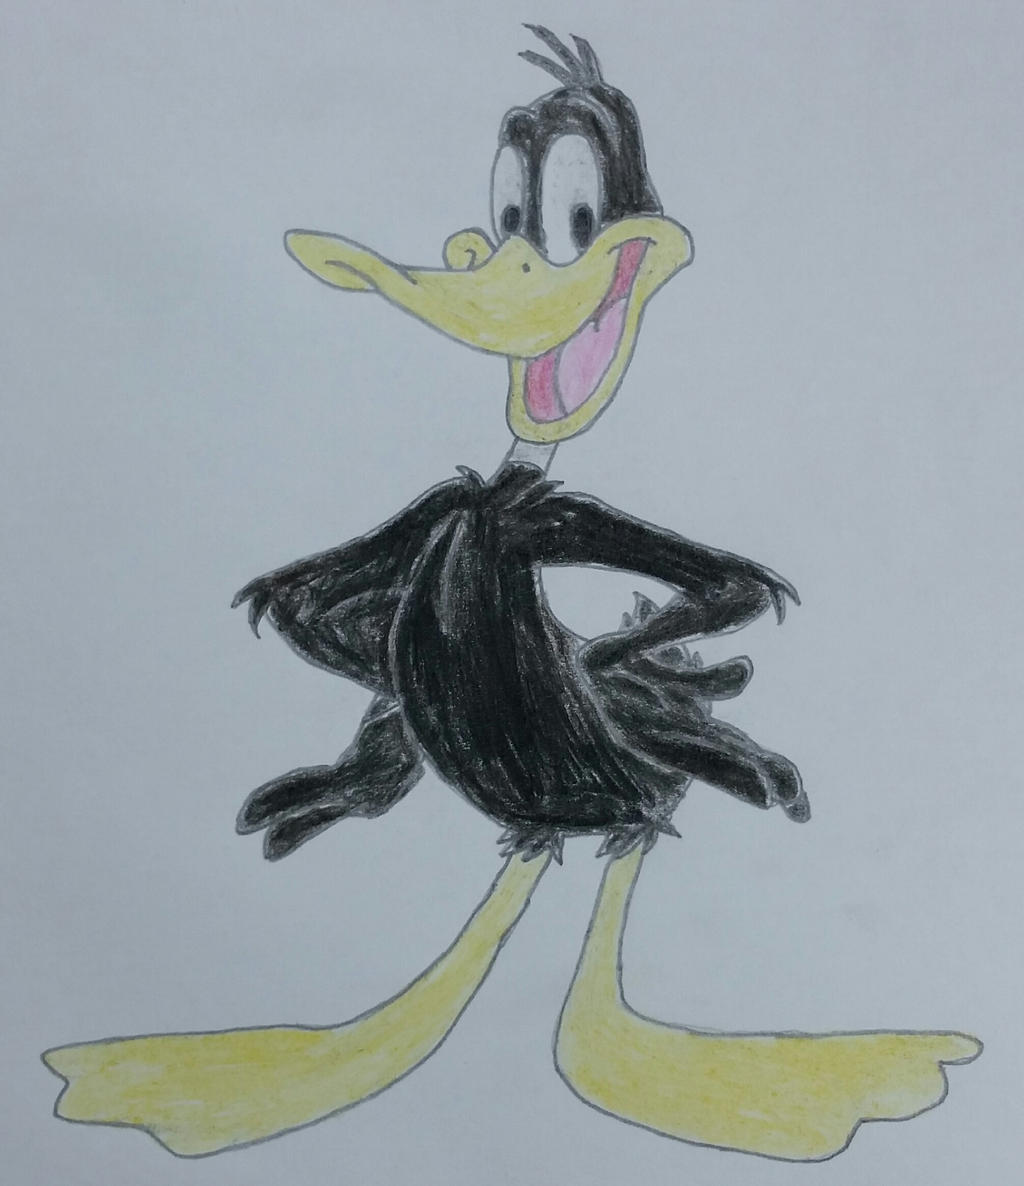 Drawing of Daffy Duck by jcpag2010 on DeviantArt